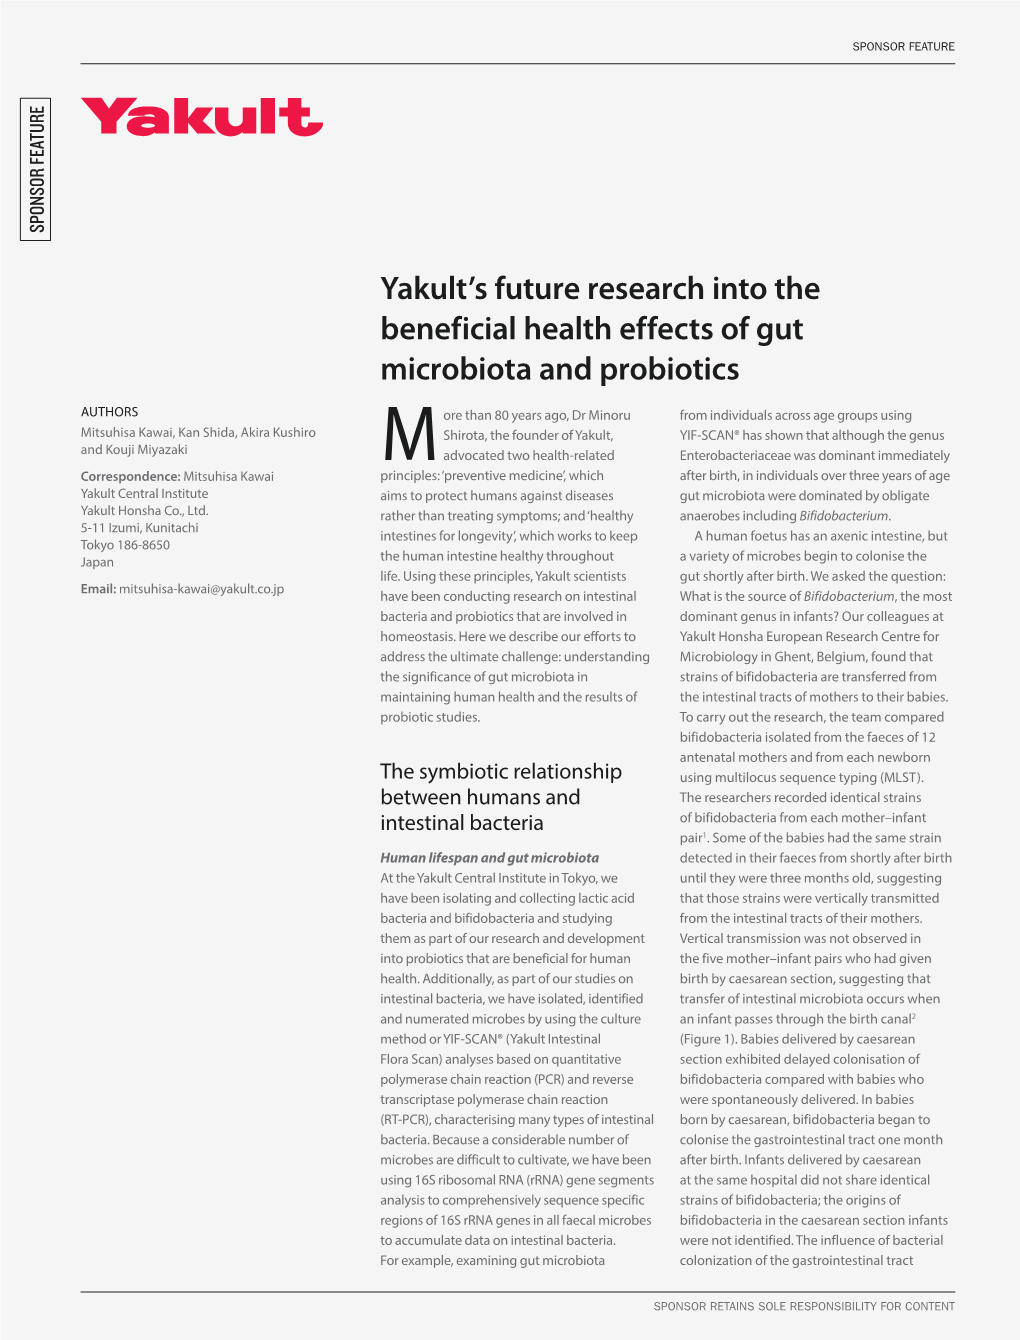 Yakult's Future Research Into the Beneficial Health Effects of Gut